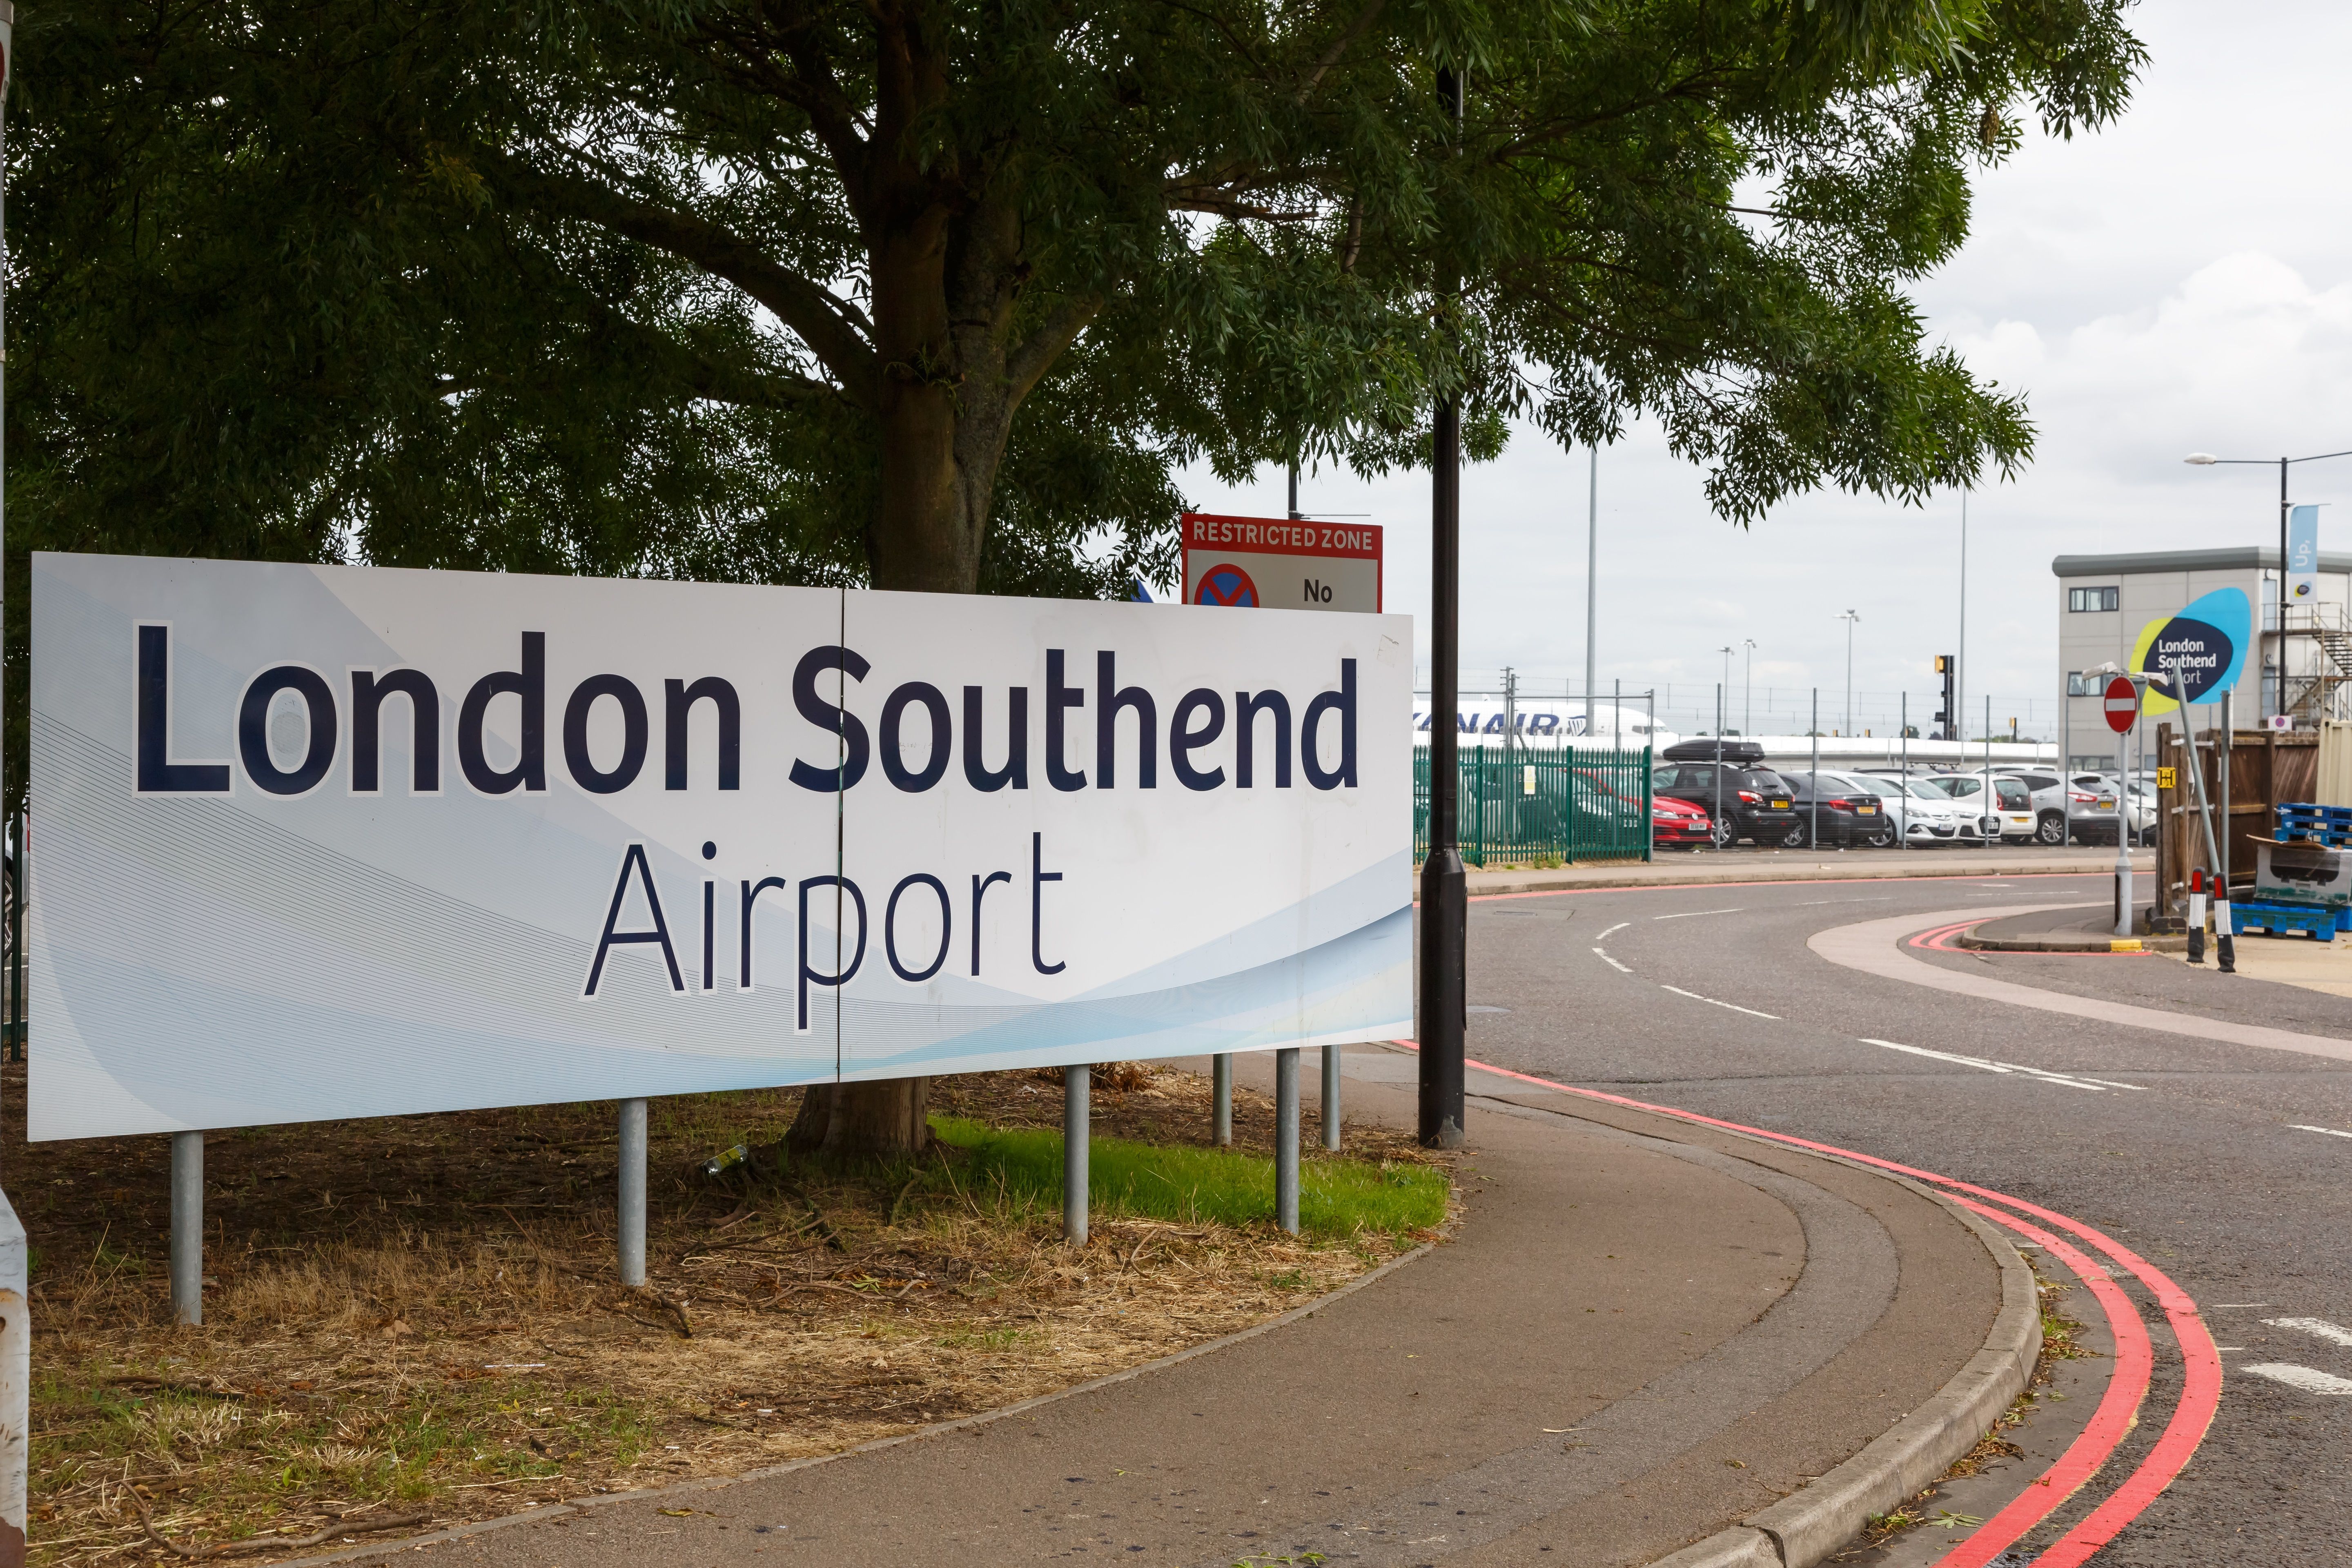 London Southend Airport sign